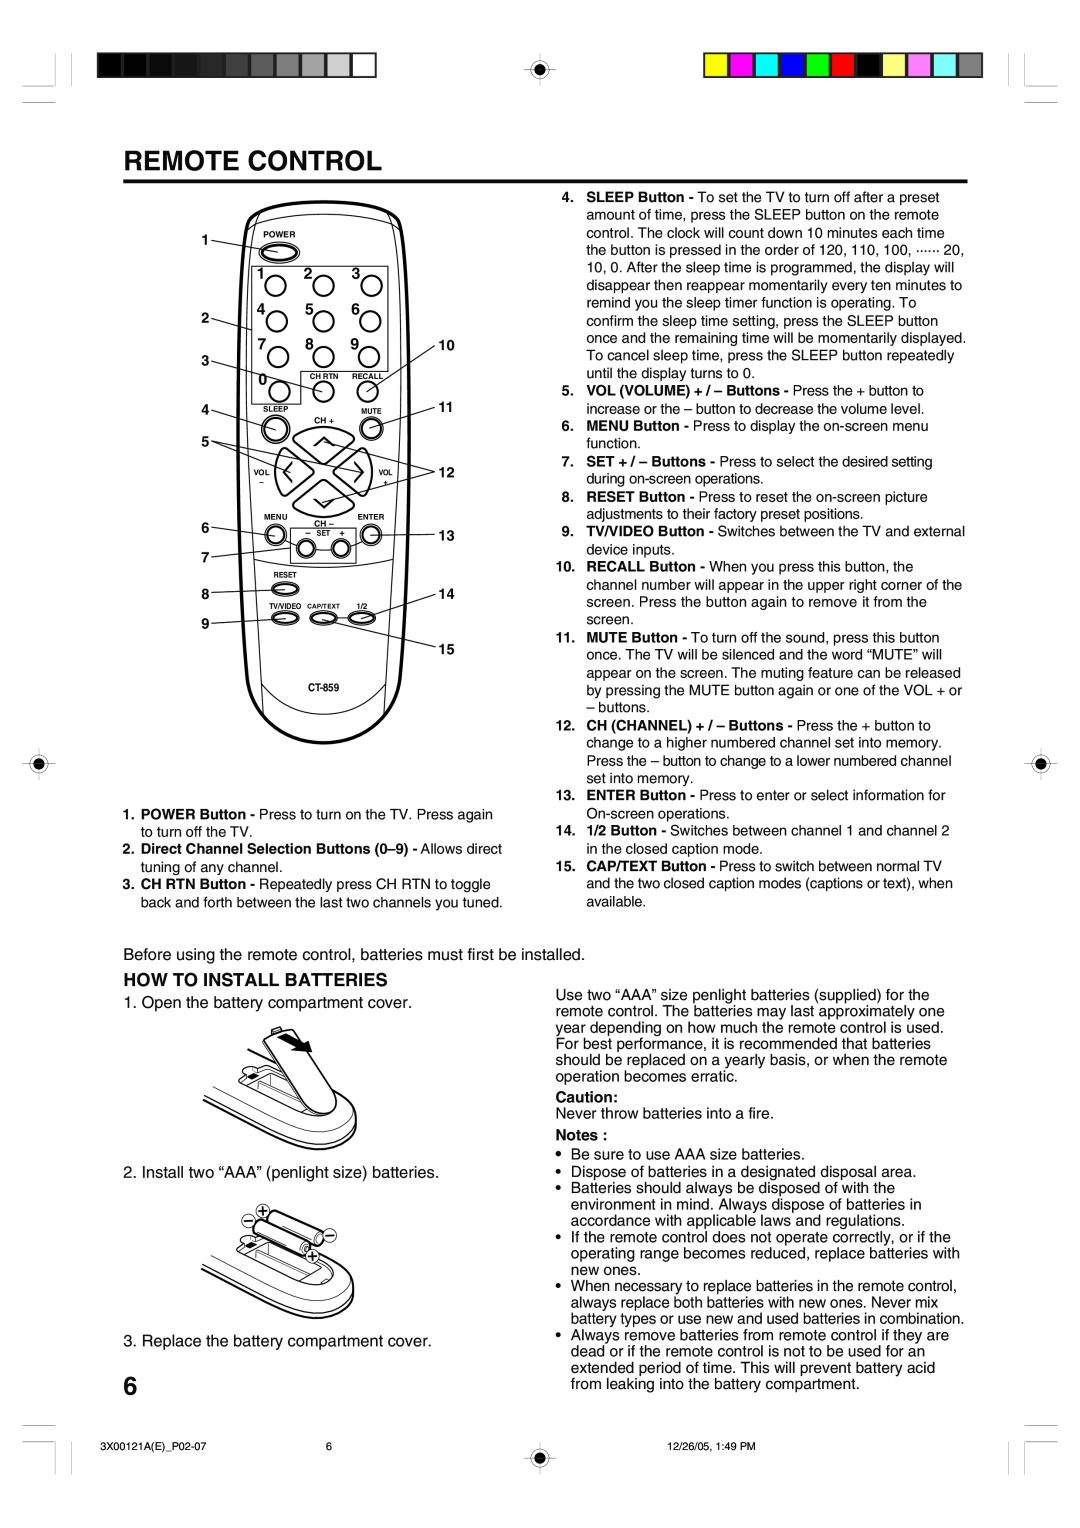 Toshiba 13A26 Remote Control, How To Install Batteries, Before using the remote control, batteries must first be installed 